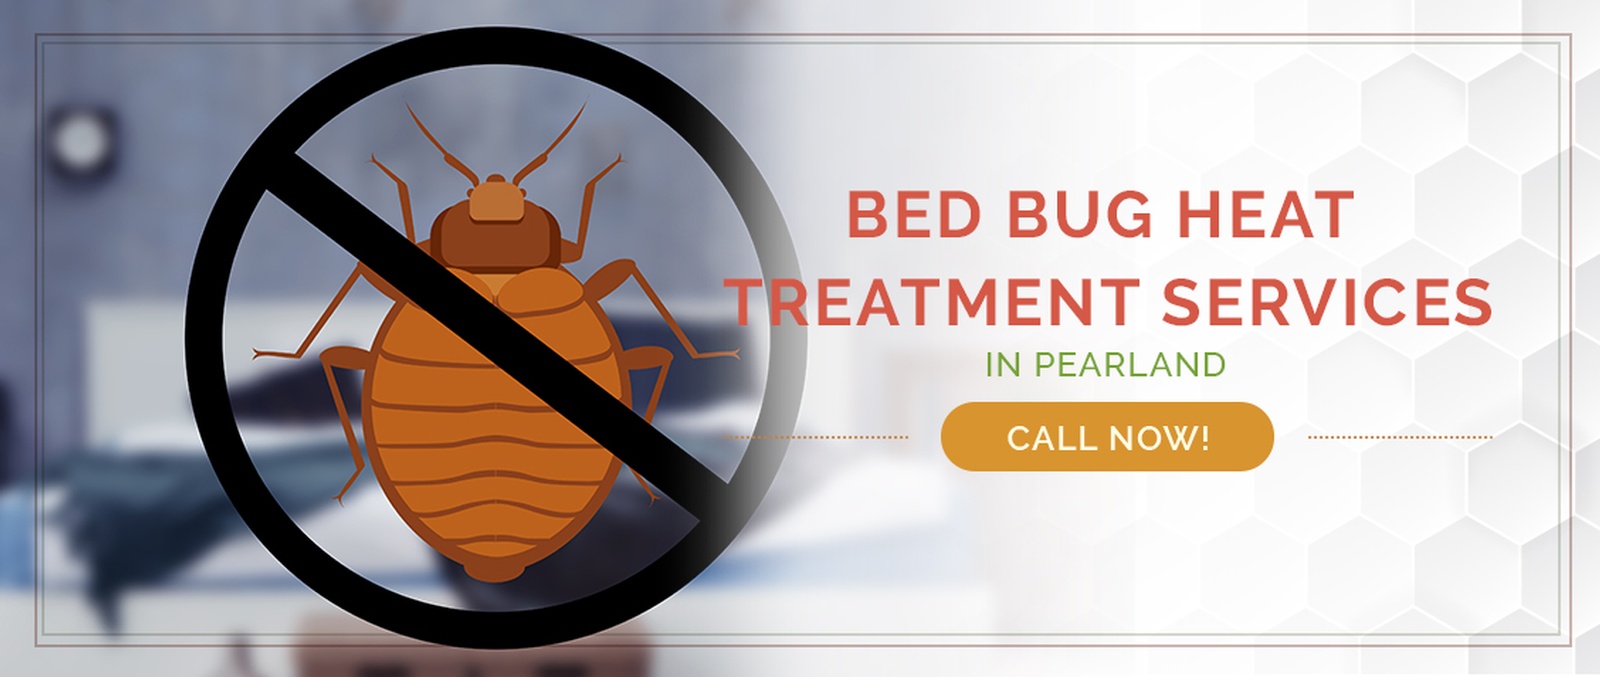 Pearland Bed Bug Treatment / Heater Rental Services by Houston Bed Bug Heaters